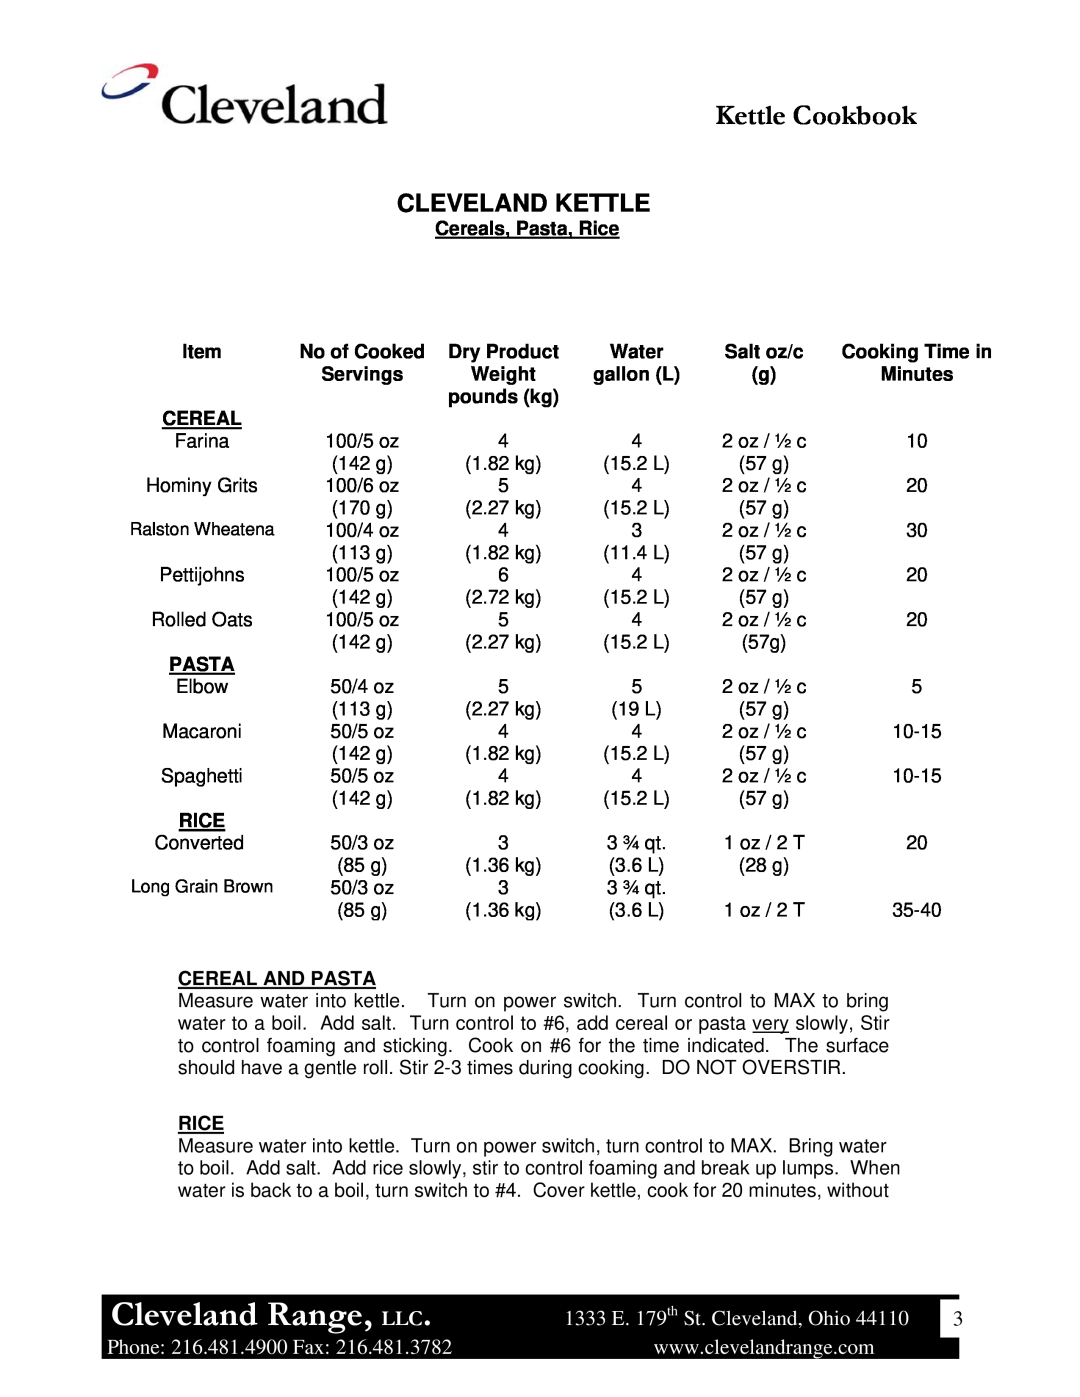 Cleveland Range Steam Jacketed Kettle Cleveland Kettle, Cleveland Range, LLC, Kettle Cookbook, Phone 216.481.4900 Fax 